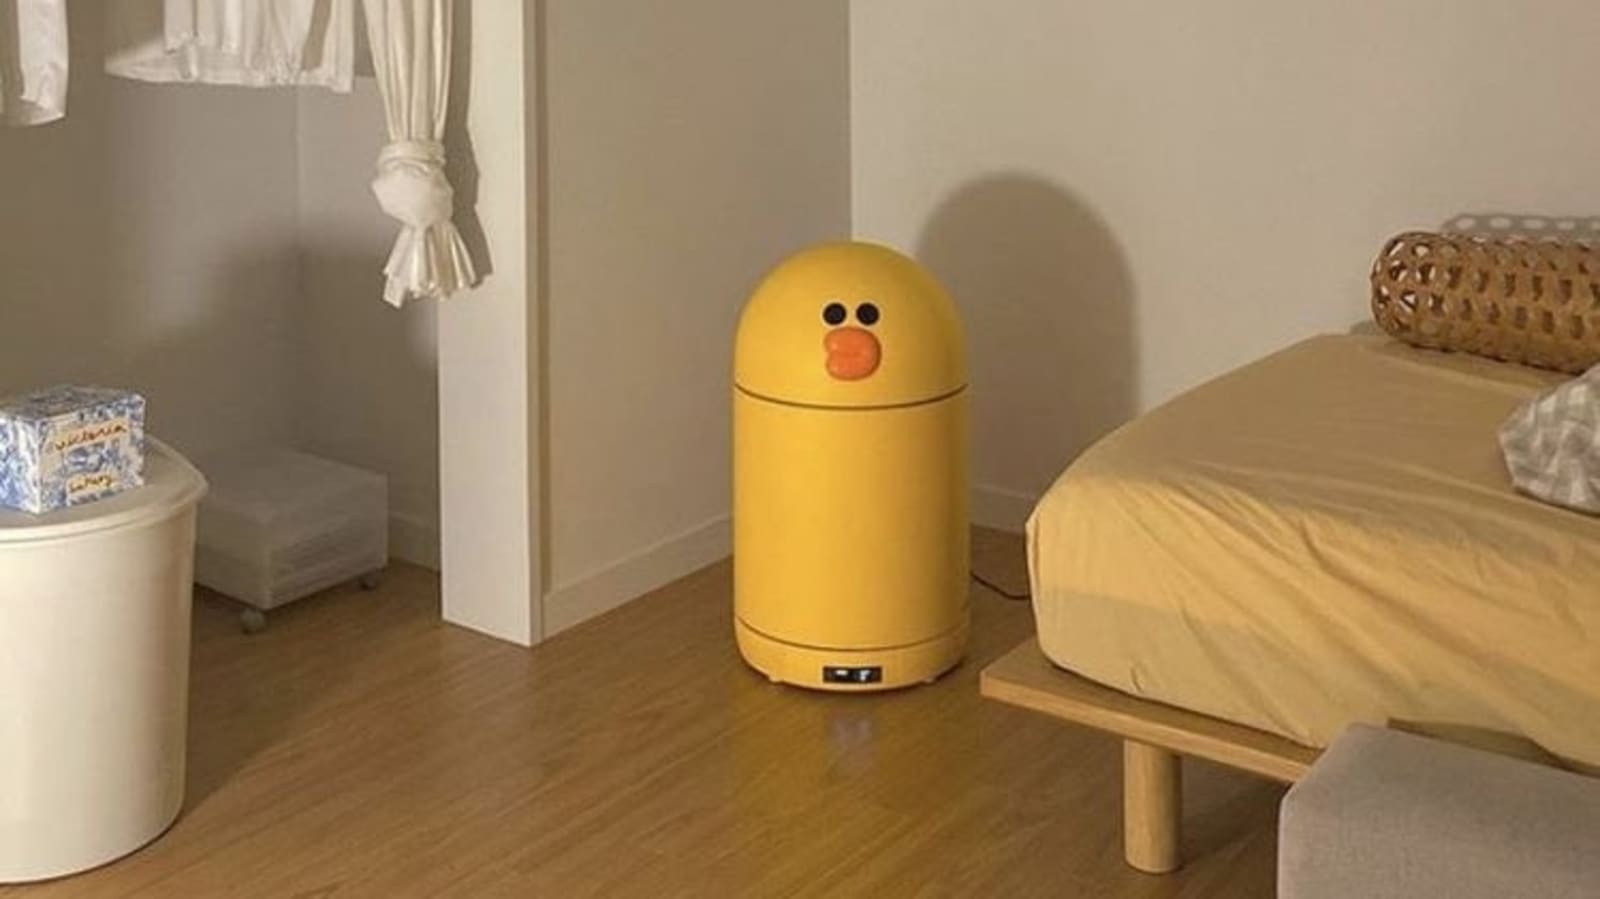 Pictures of this duck-shaped fridge will make you say 'I want one